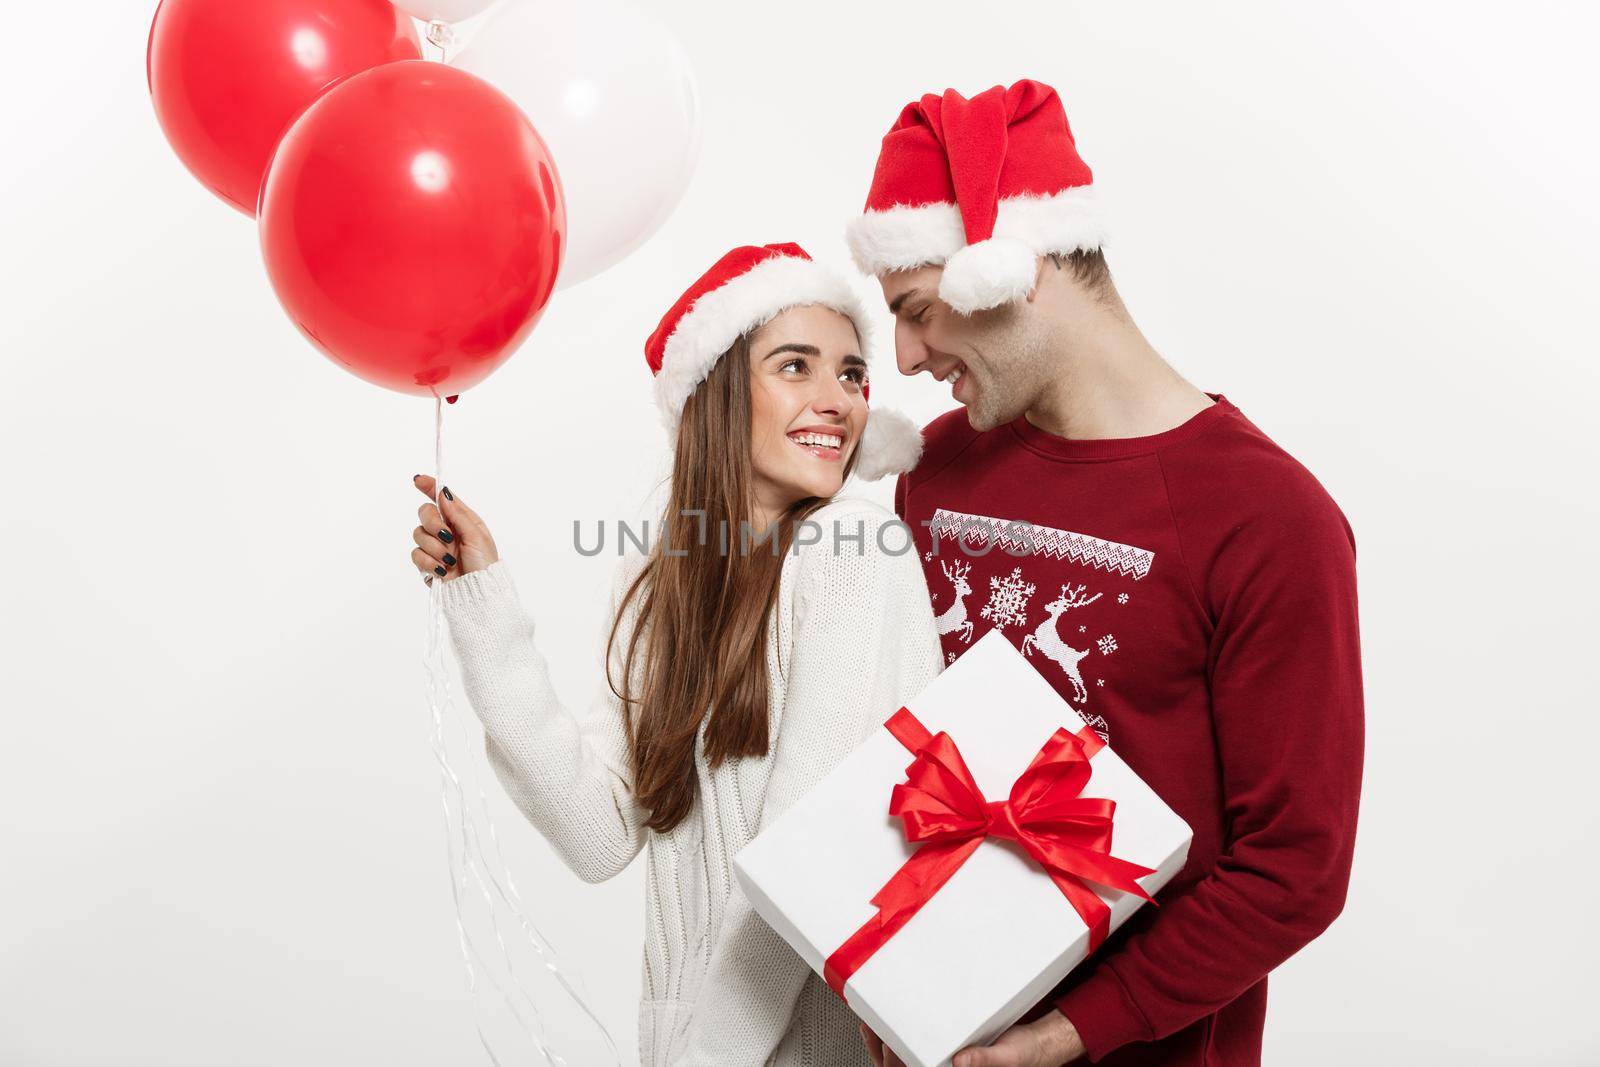 Christmas Concept - Young girlfriend holding balloon is hugging and playing with her boyfriend doing a surprise on Christmas.